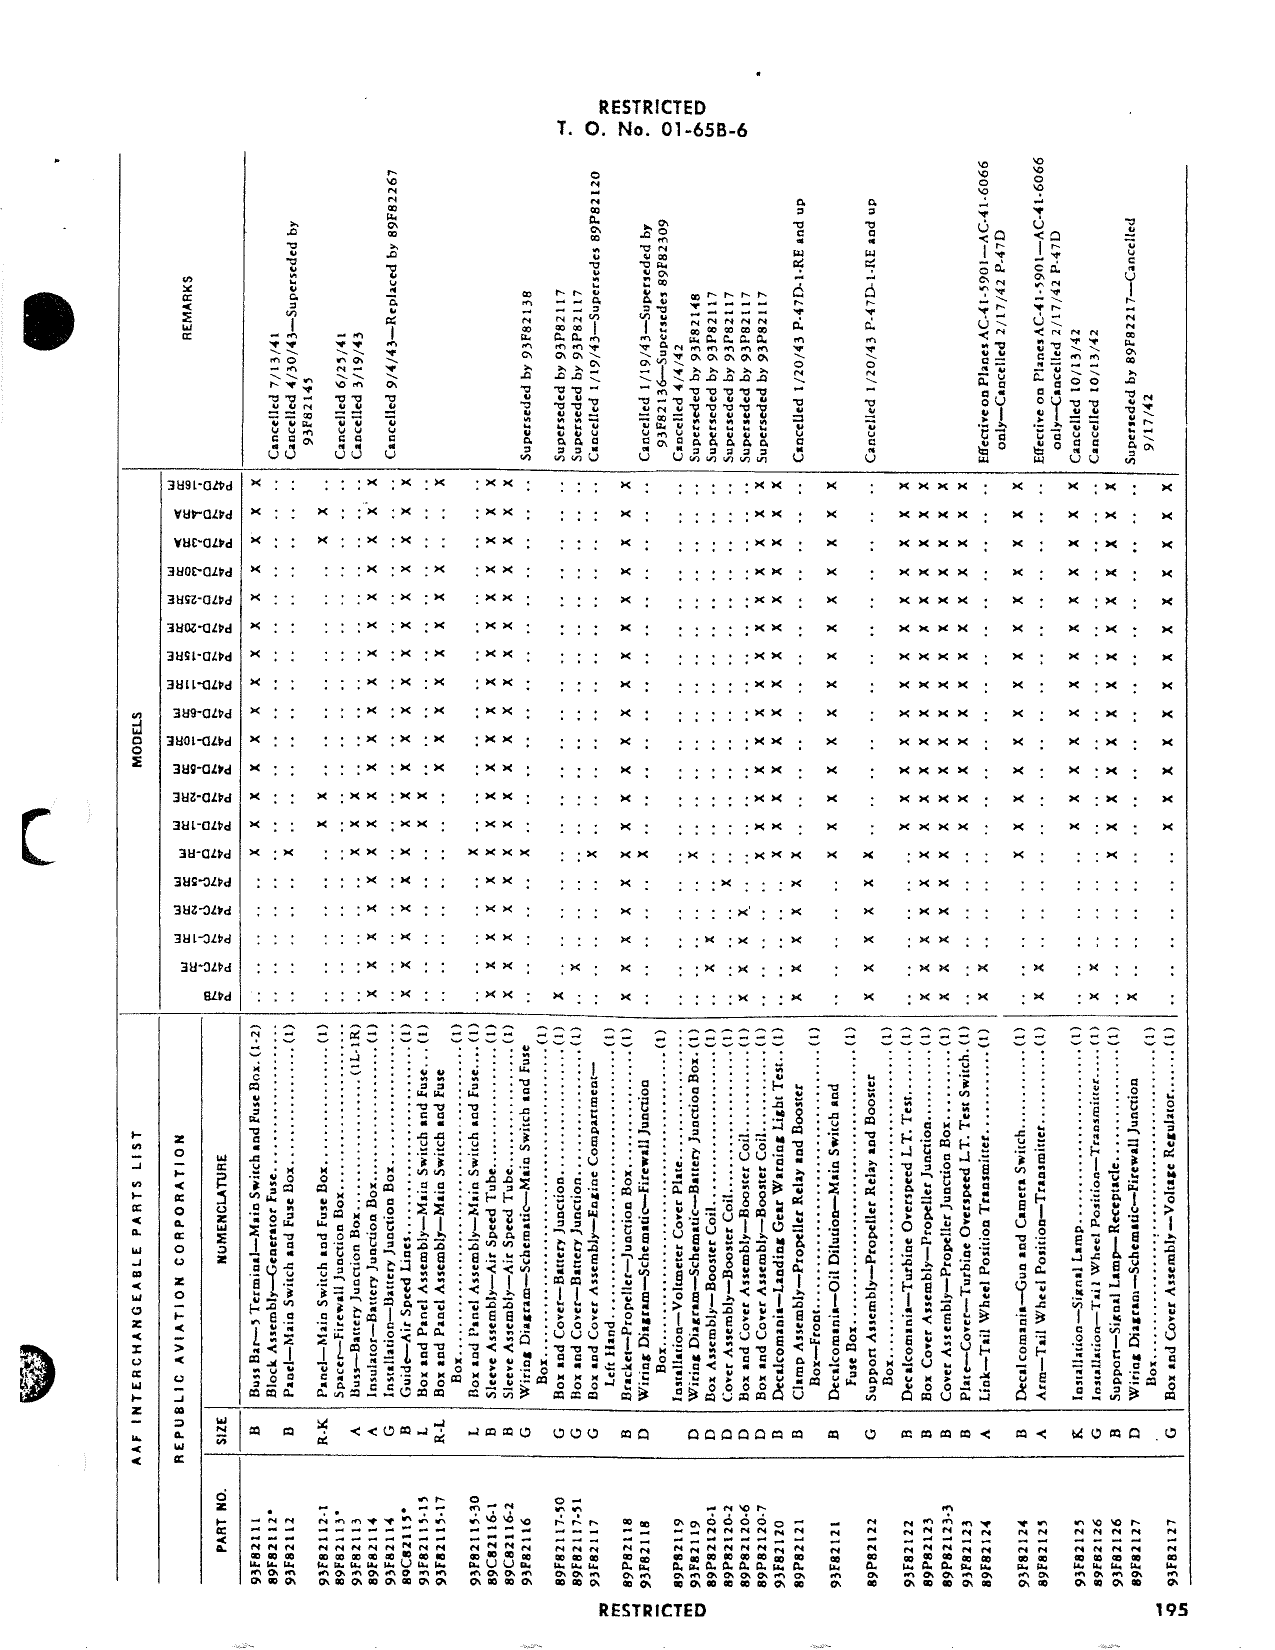 Sample page 199 from AirCorps Library document: Interchangeable Parts List - P-47